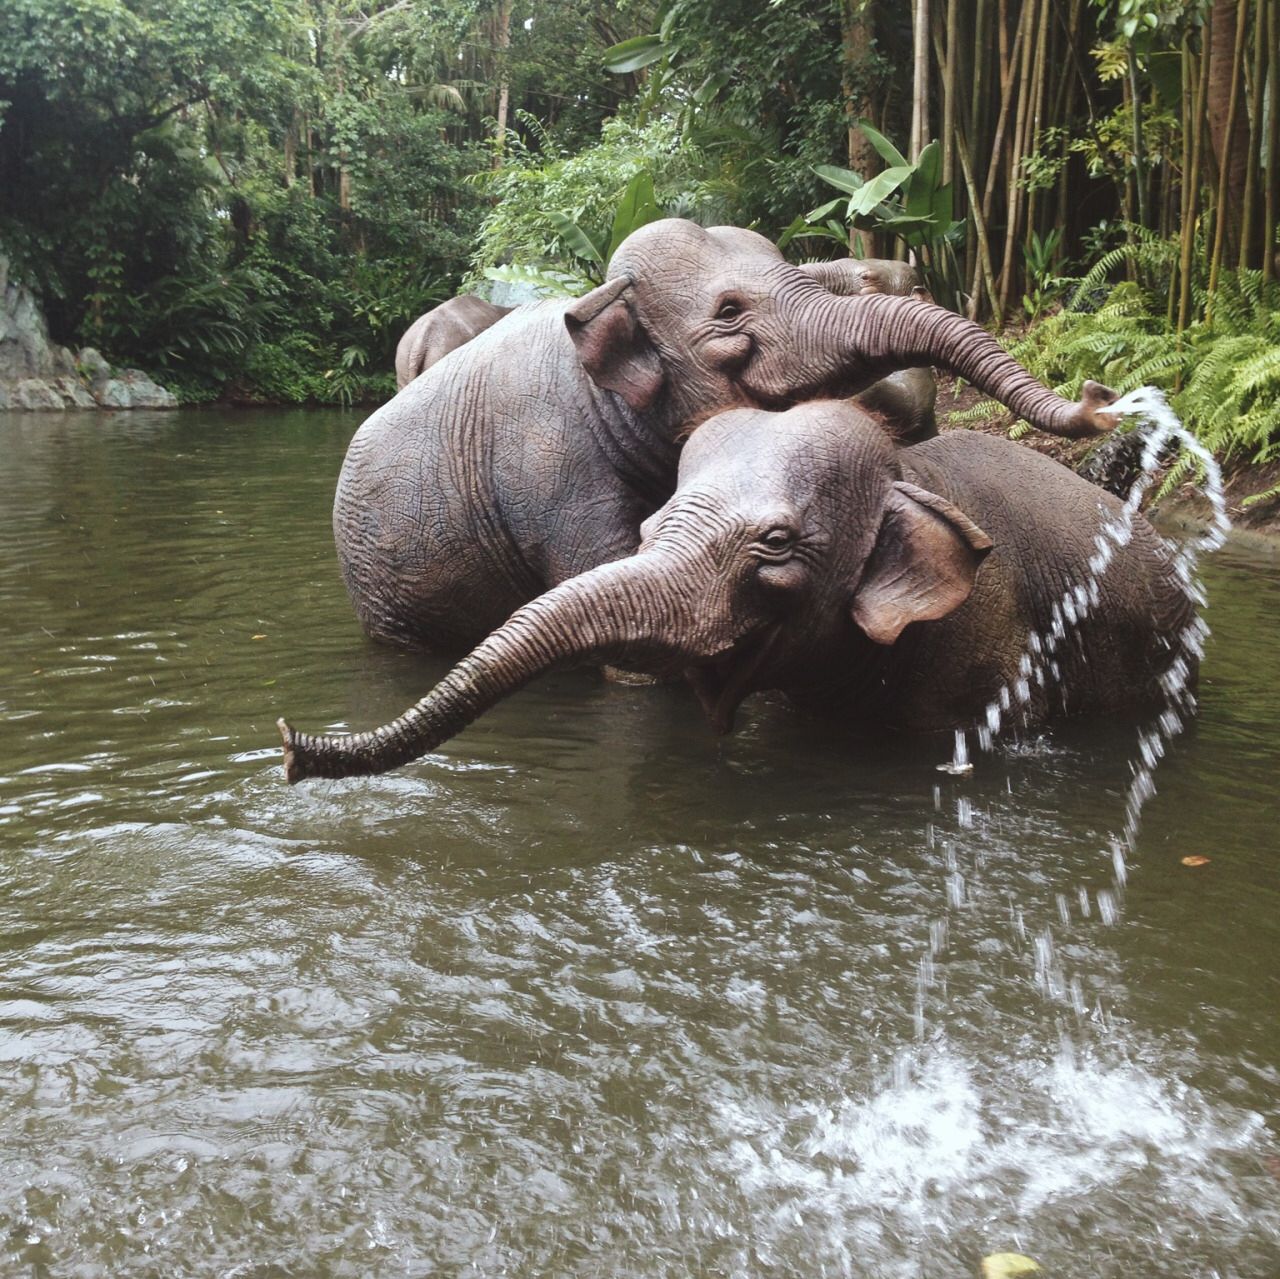 Enthusiastic Baby Elephants Delight in the Majesty of a Waterfall. l - LifeAnimal